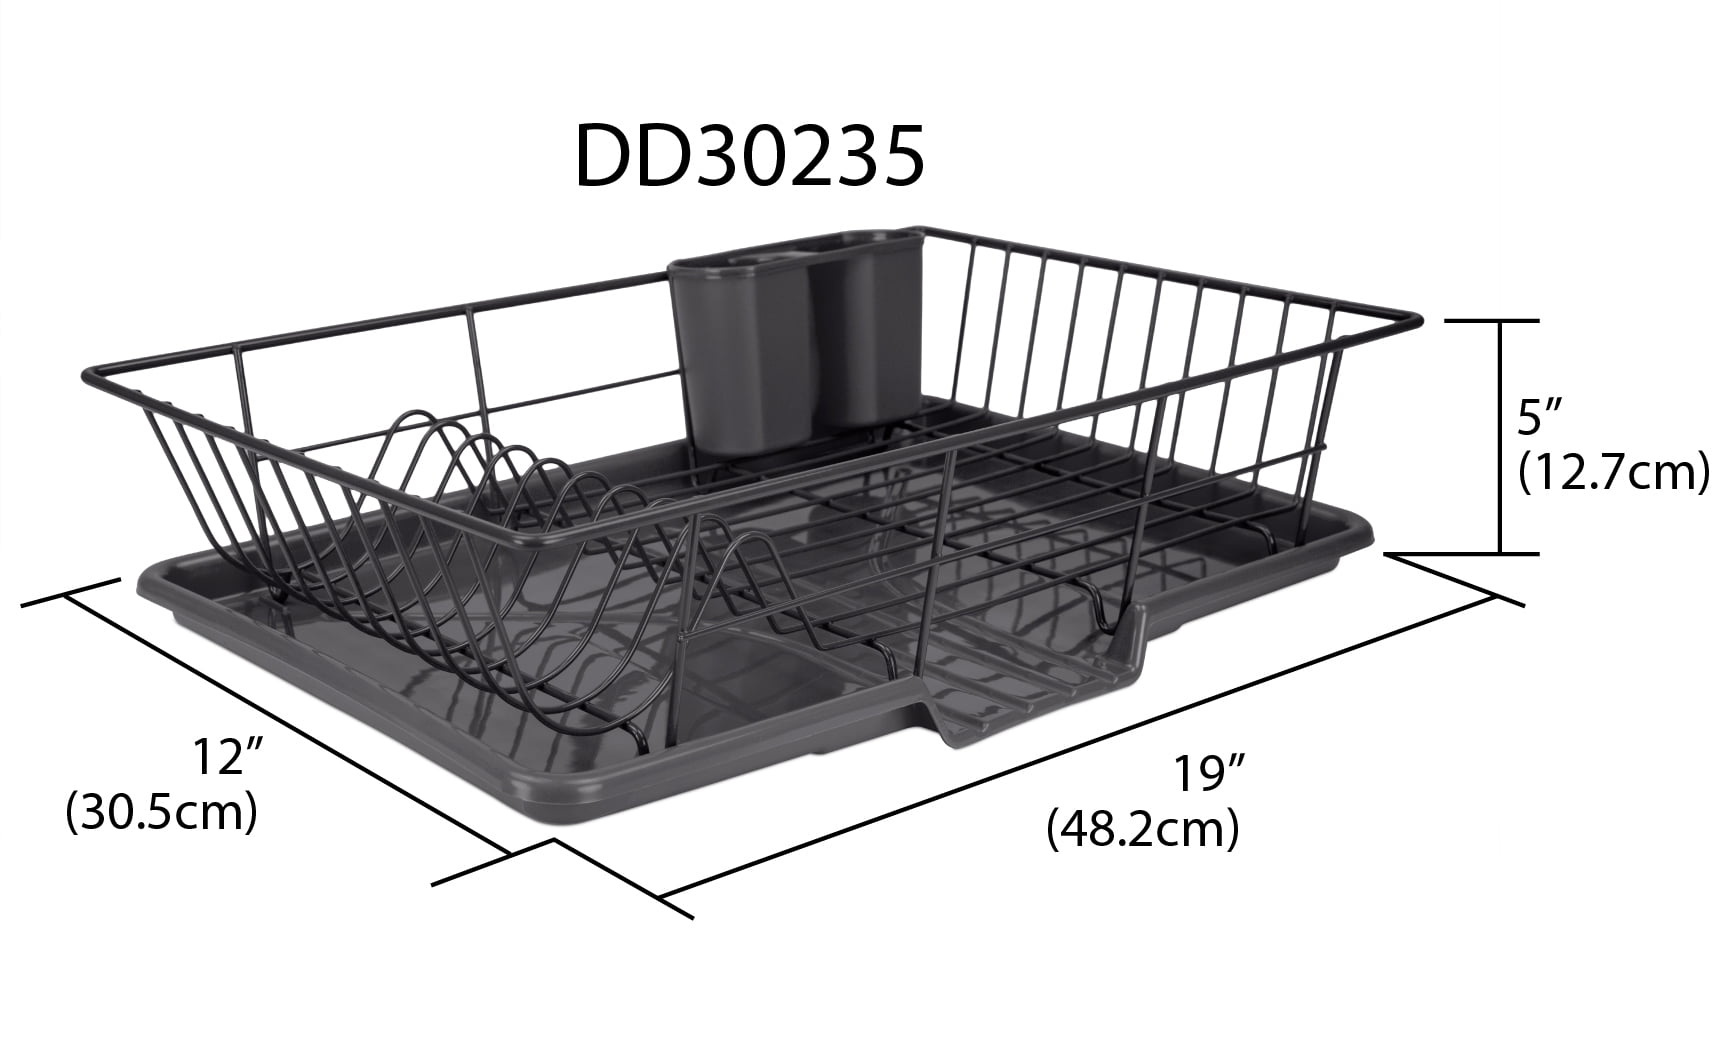 Dish Drainer Rack – Lifestyle Supplies Store